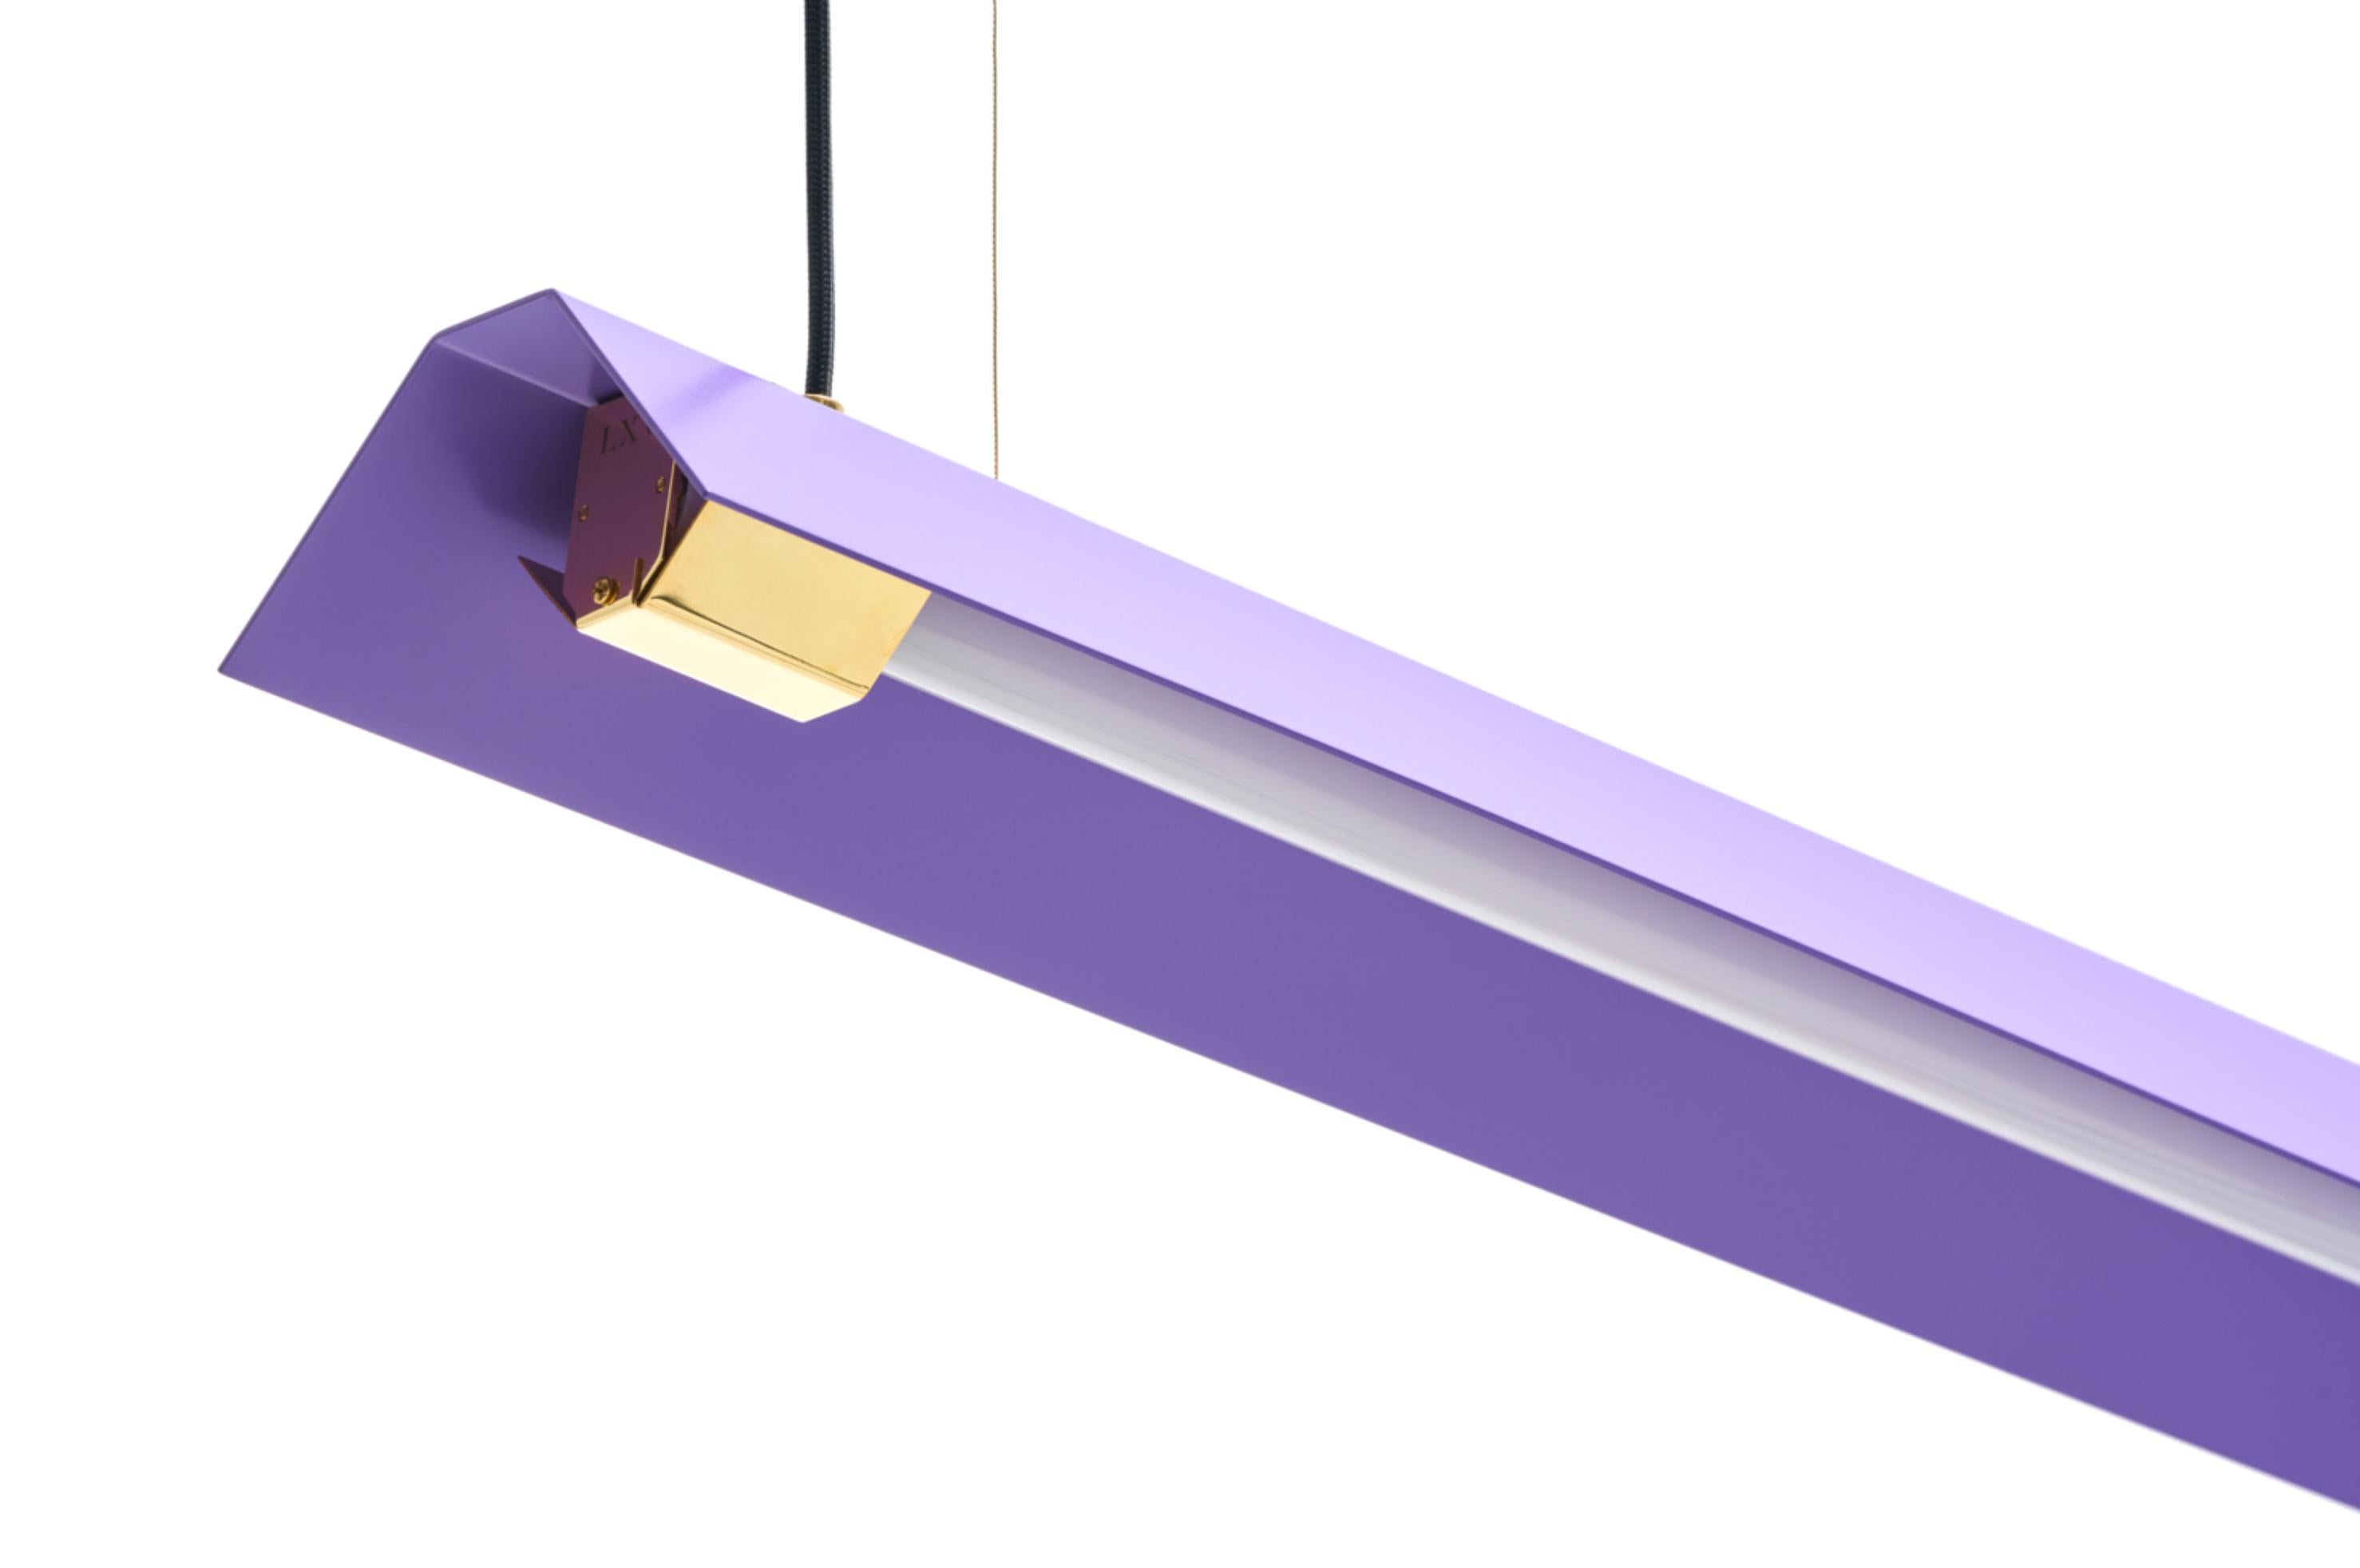 Large Misalliance Ex Lavender suspended light by Lexavala
Dimensions: D 16 x W 130 x H 8 cm
Materials: powder coated shade with details made of brass or stainless steel.

There are two lenghts of socket covers, extending over the LED. Two short